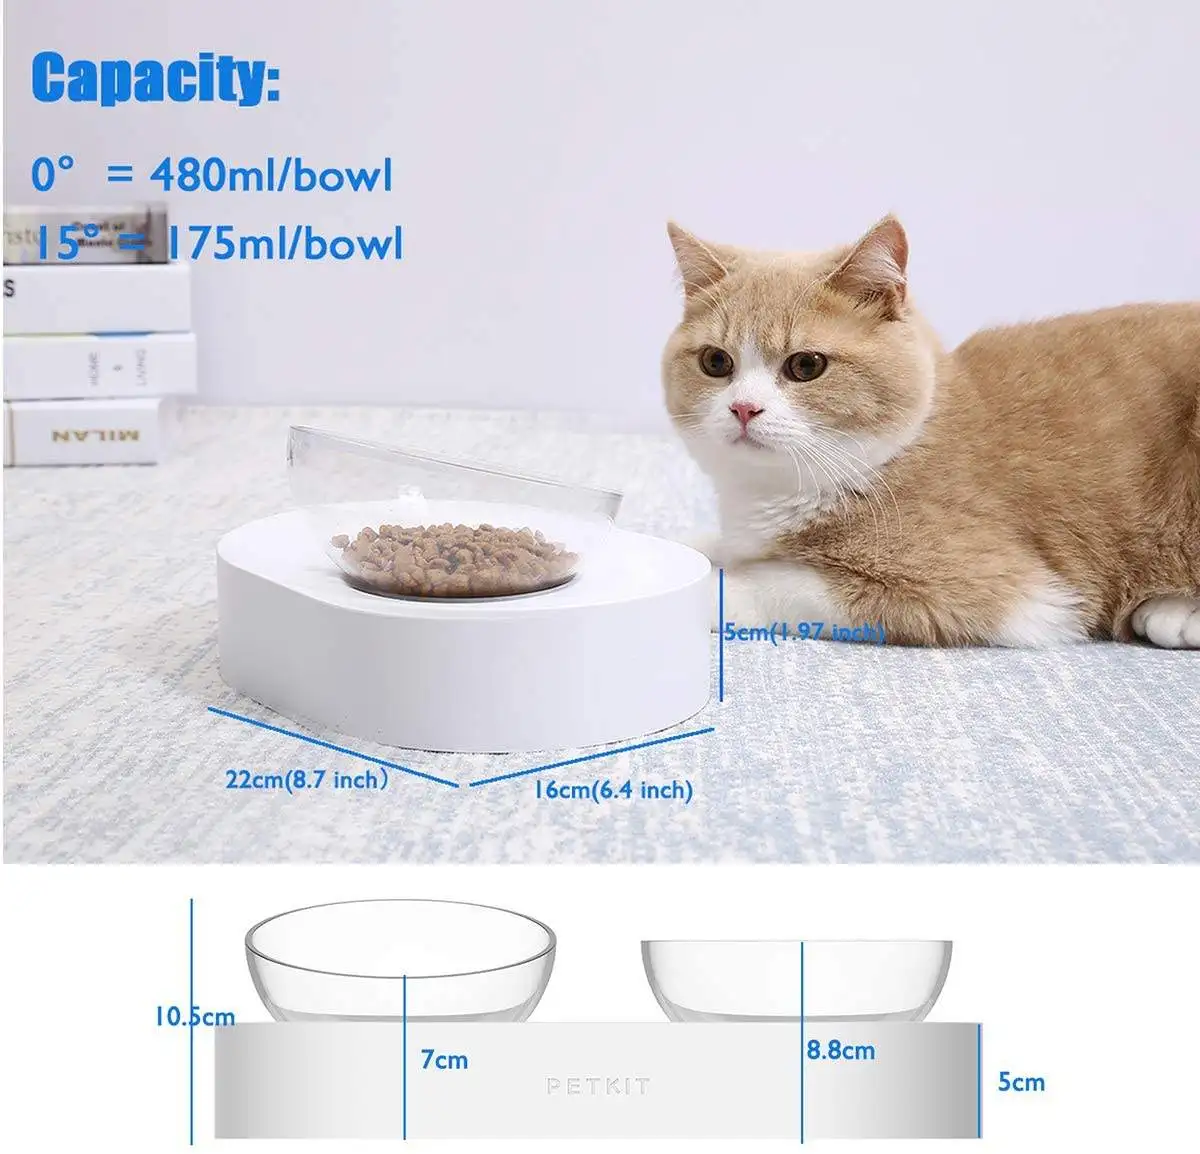 https://ae01.alicdn.com/kf/S2712848d80714aecb8833836afb0ef00L/Petkit-Fresh-Nano-Cat-Bowl-Prevent-Kitty-Spinal-Fatigue-Adjustable-Height-Stainless-Steel-Material-Pet-Food.jpg